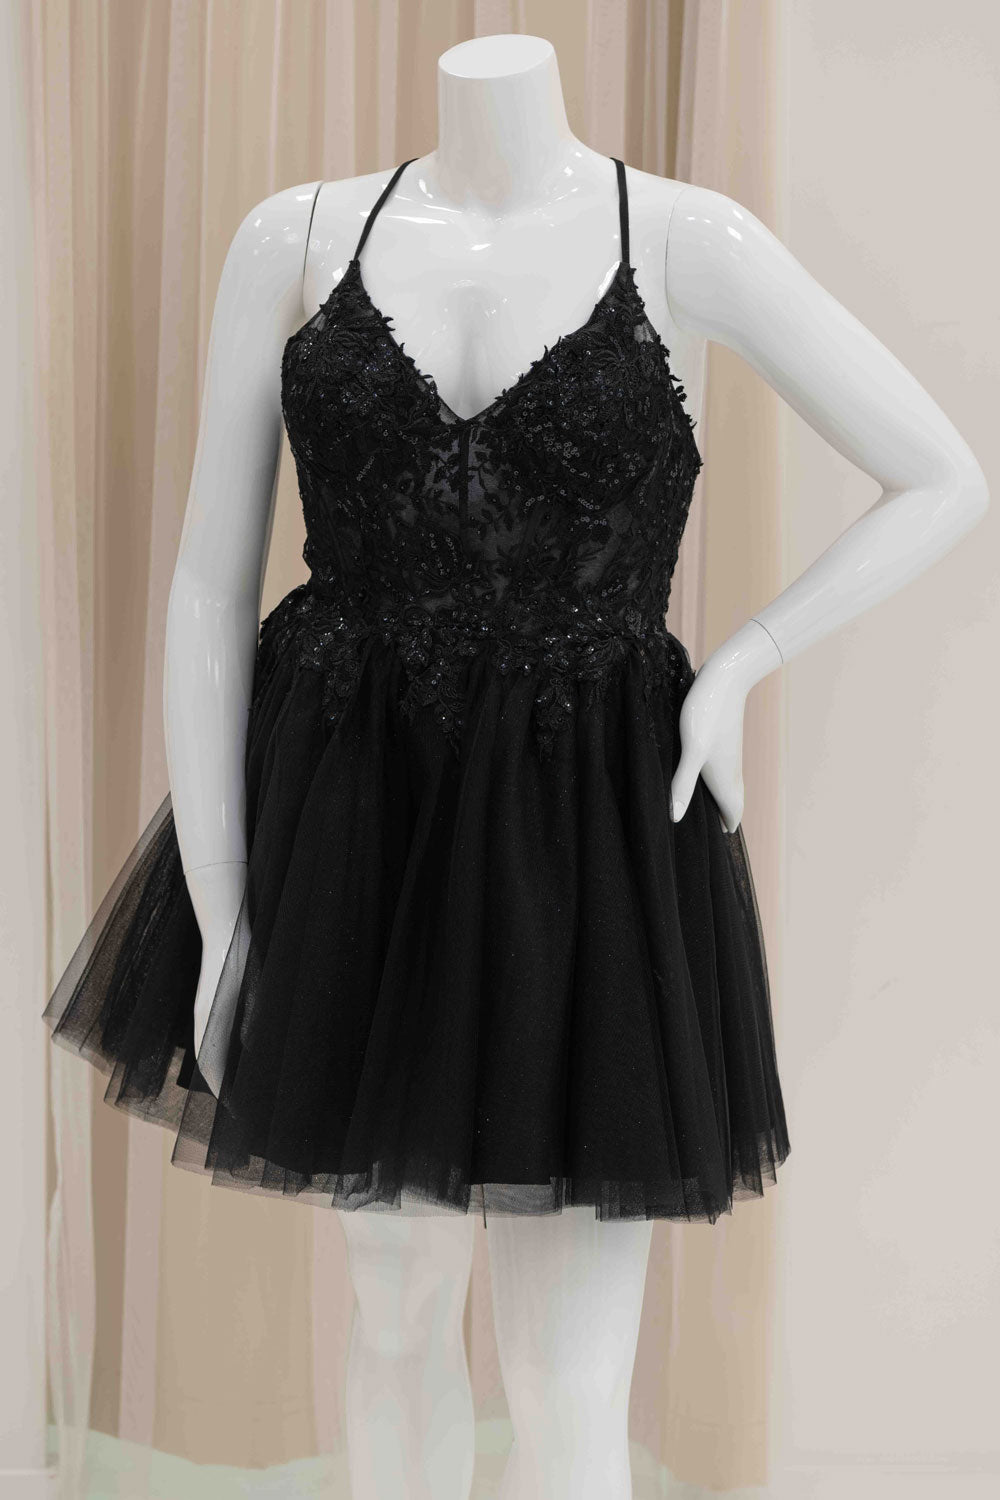 Black Tulle Fit and Flare Dress for 8th Grade Dance